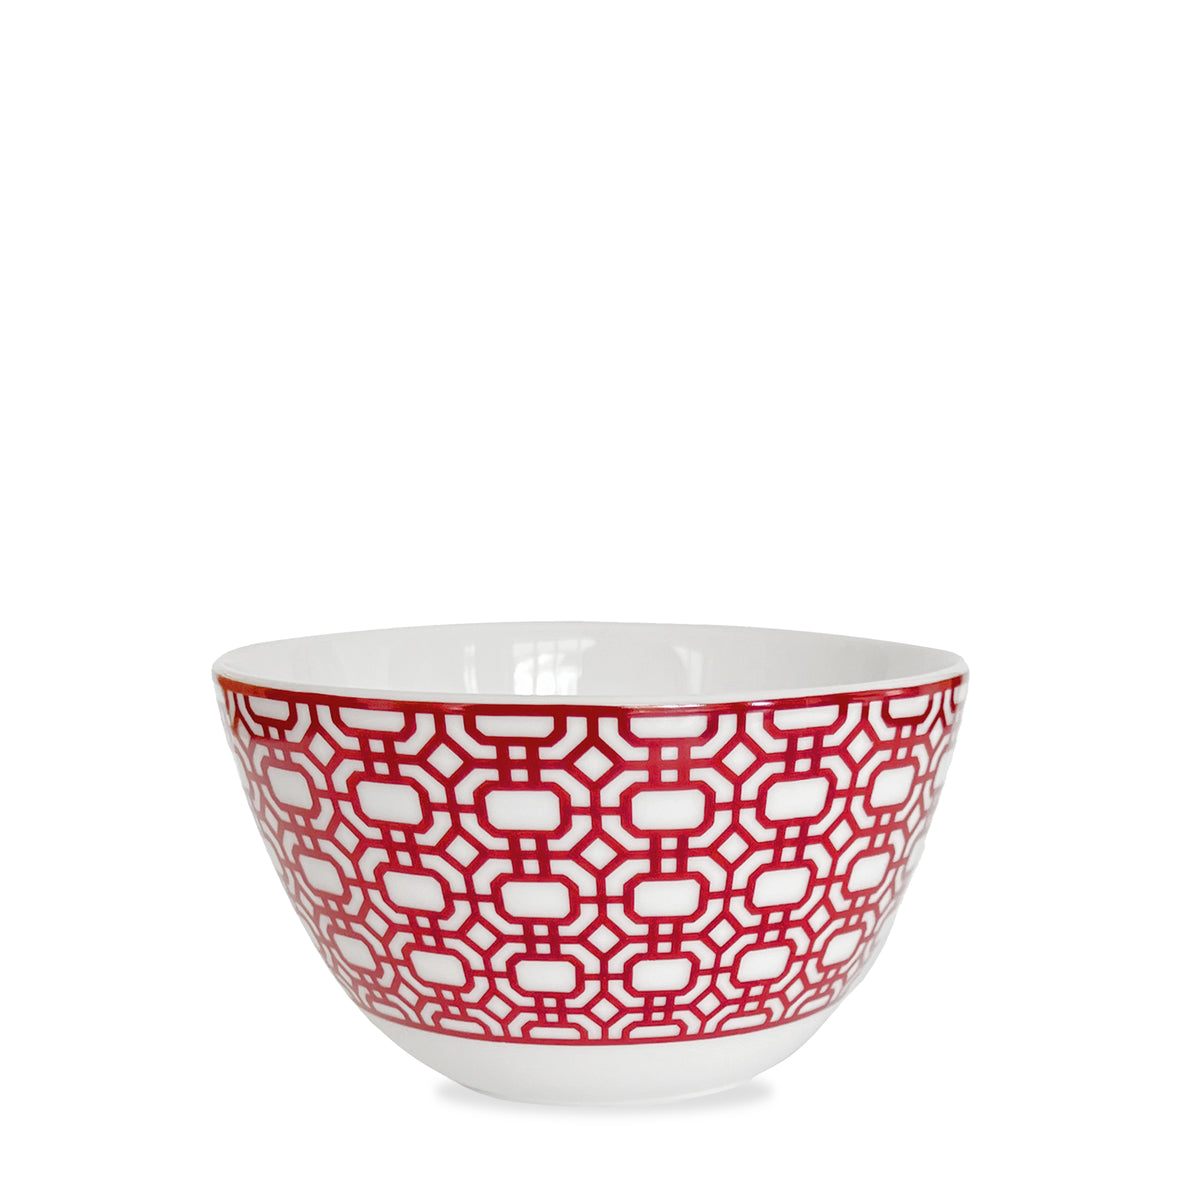 Newport Crimson Cereal Bowl in Red and White Porcelain from Caskata